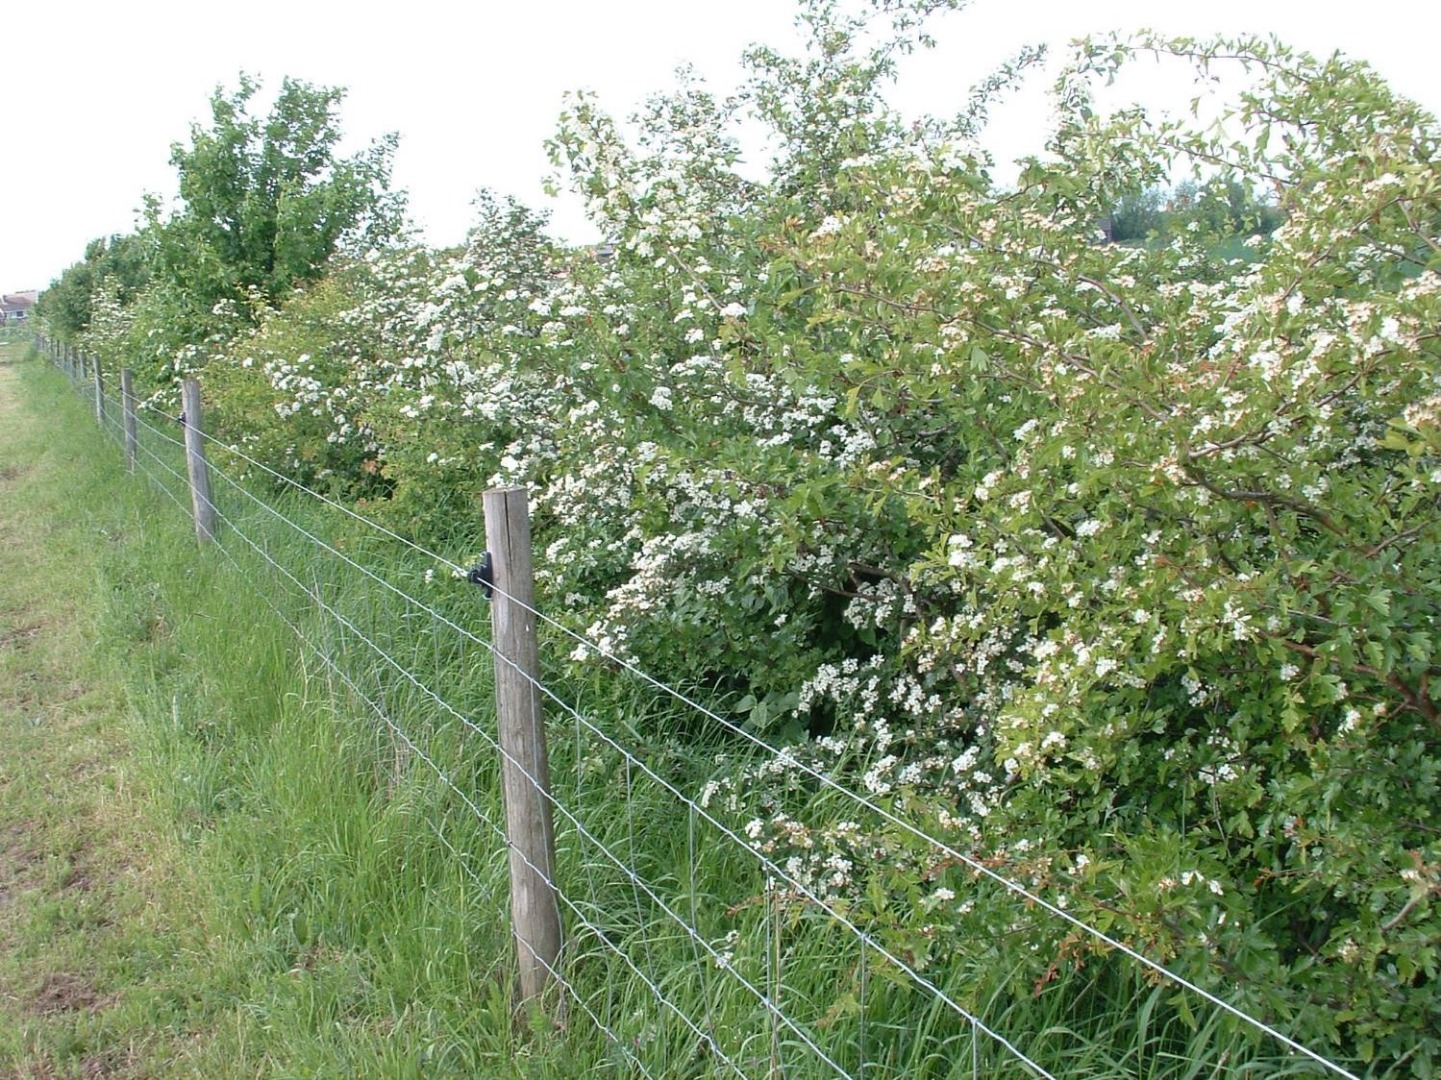 Post and wire fencing